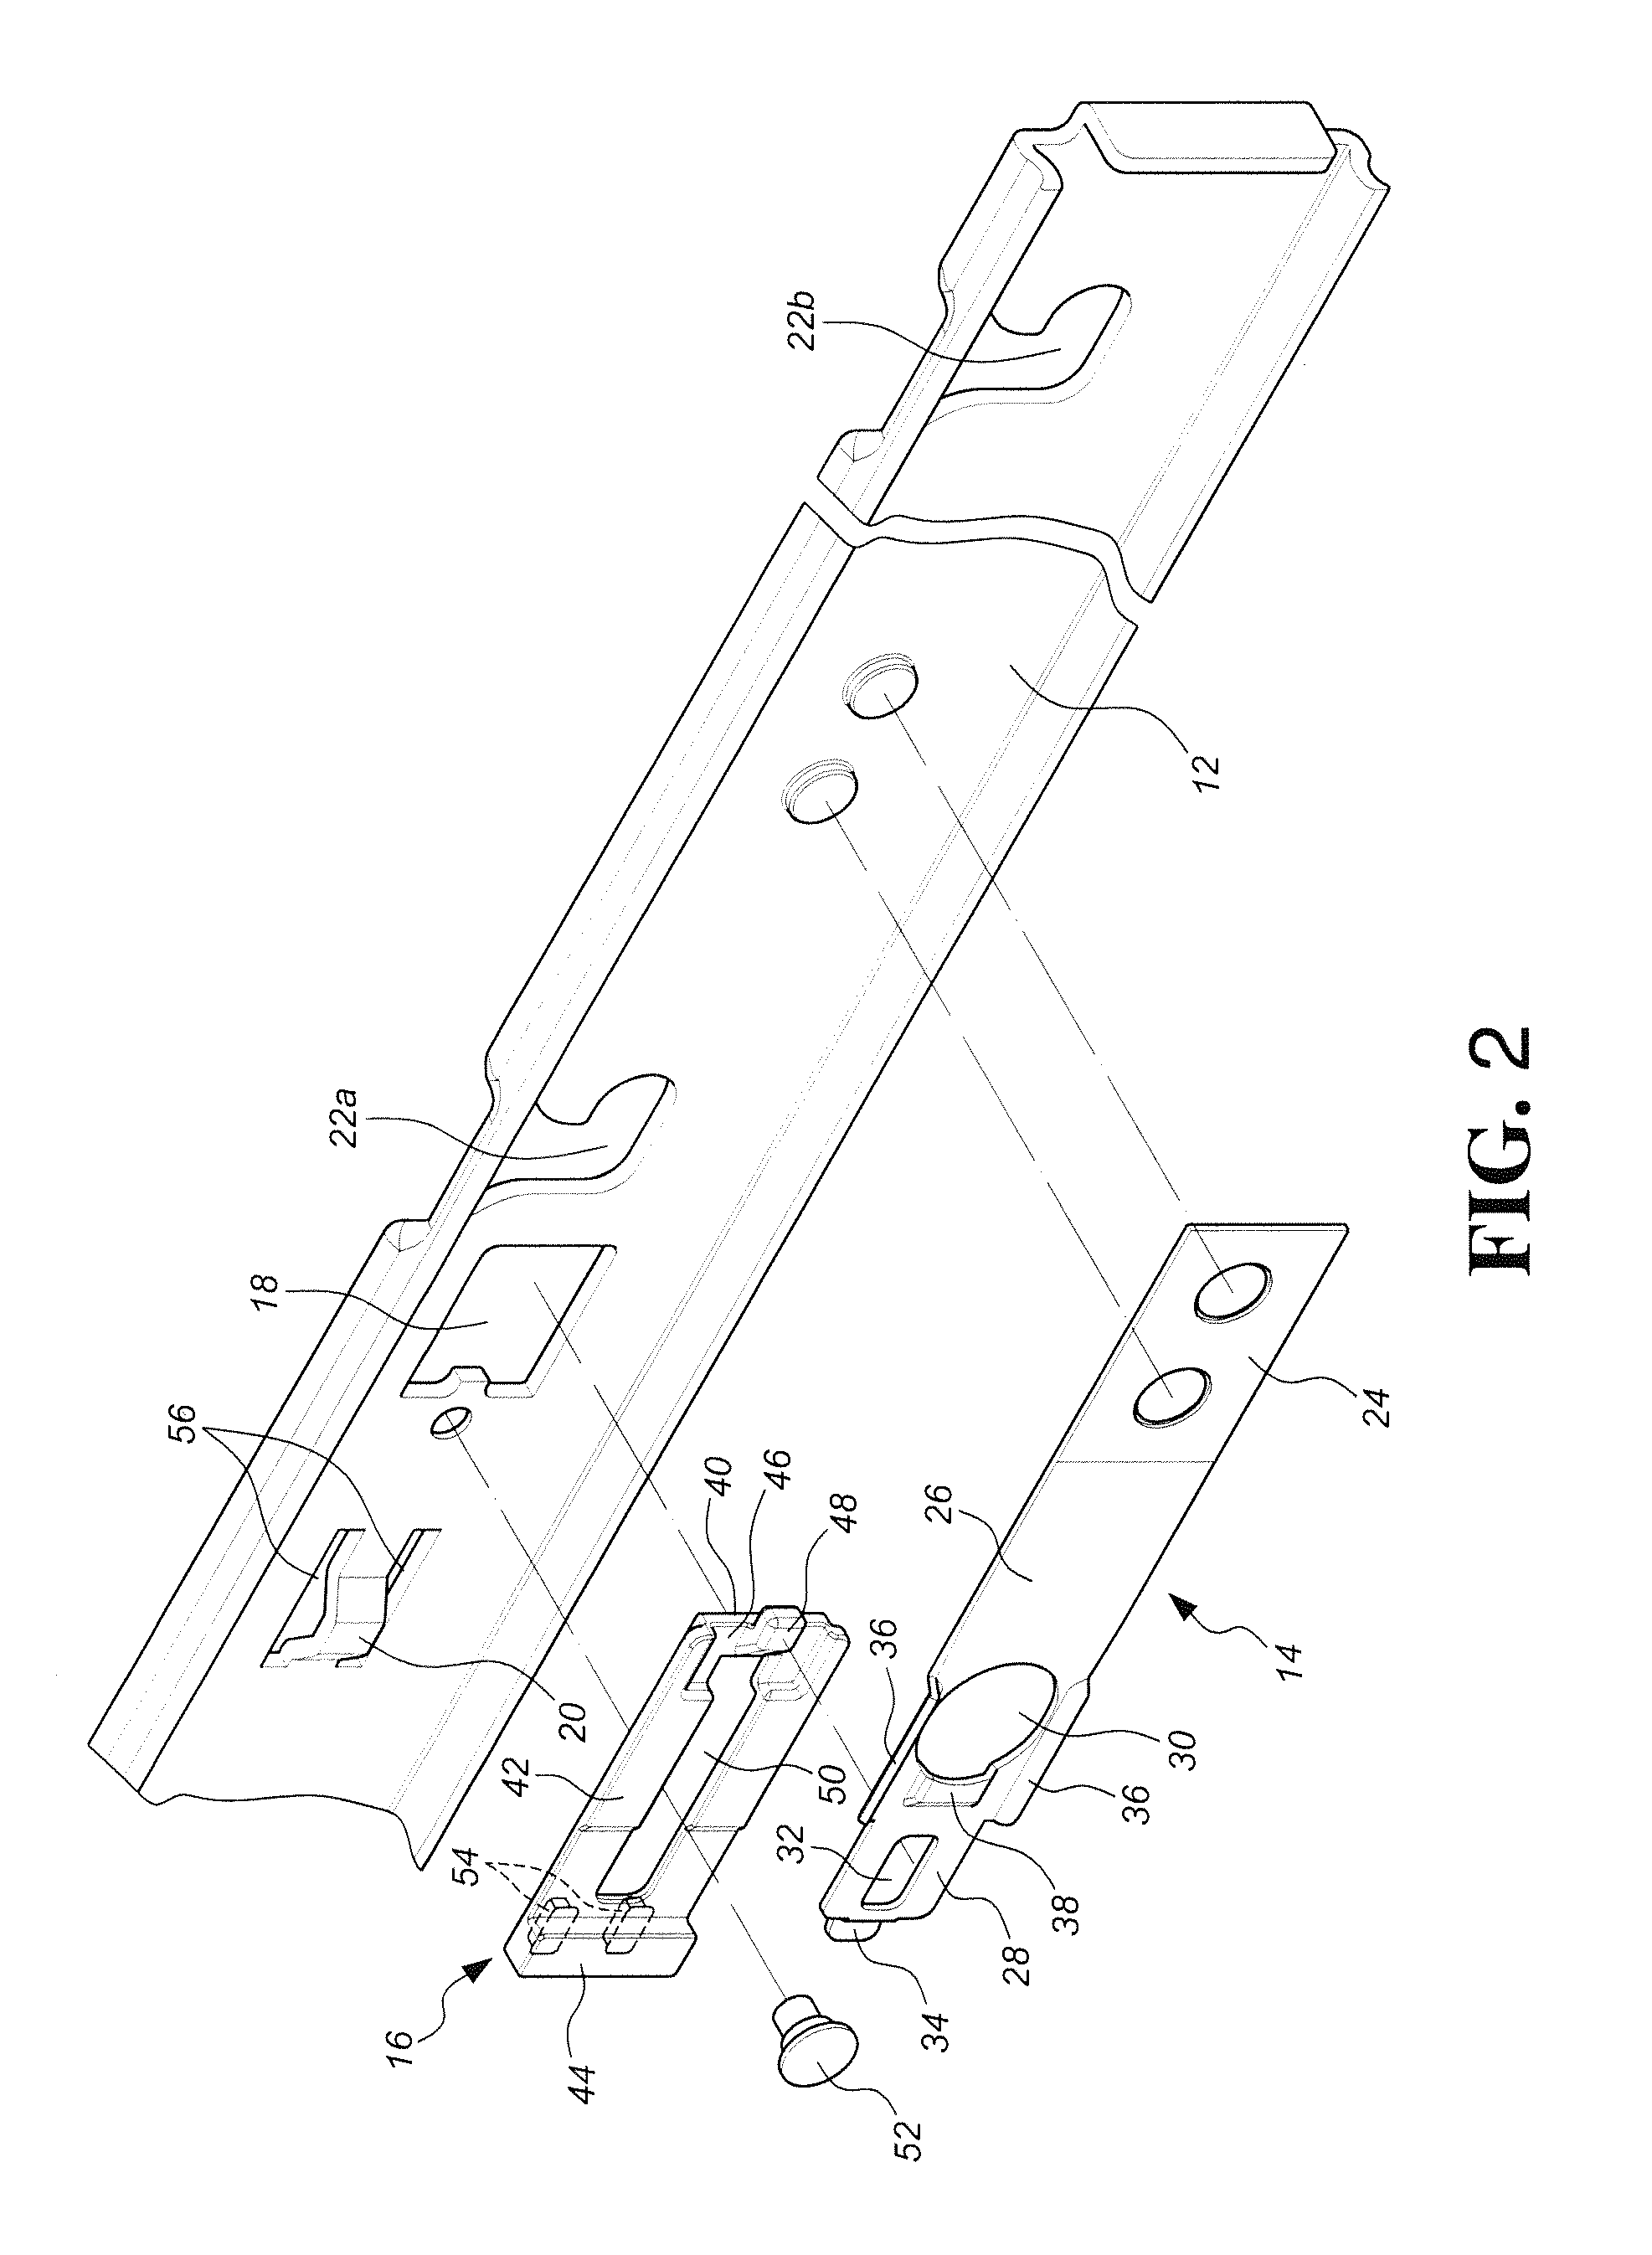 Installation device for slide assembly